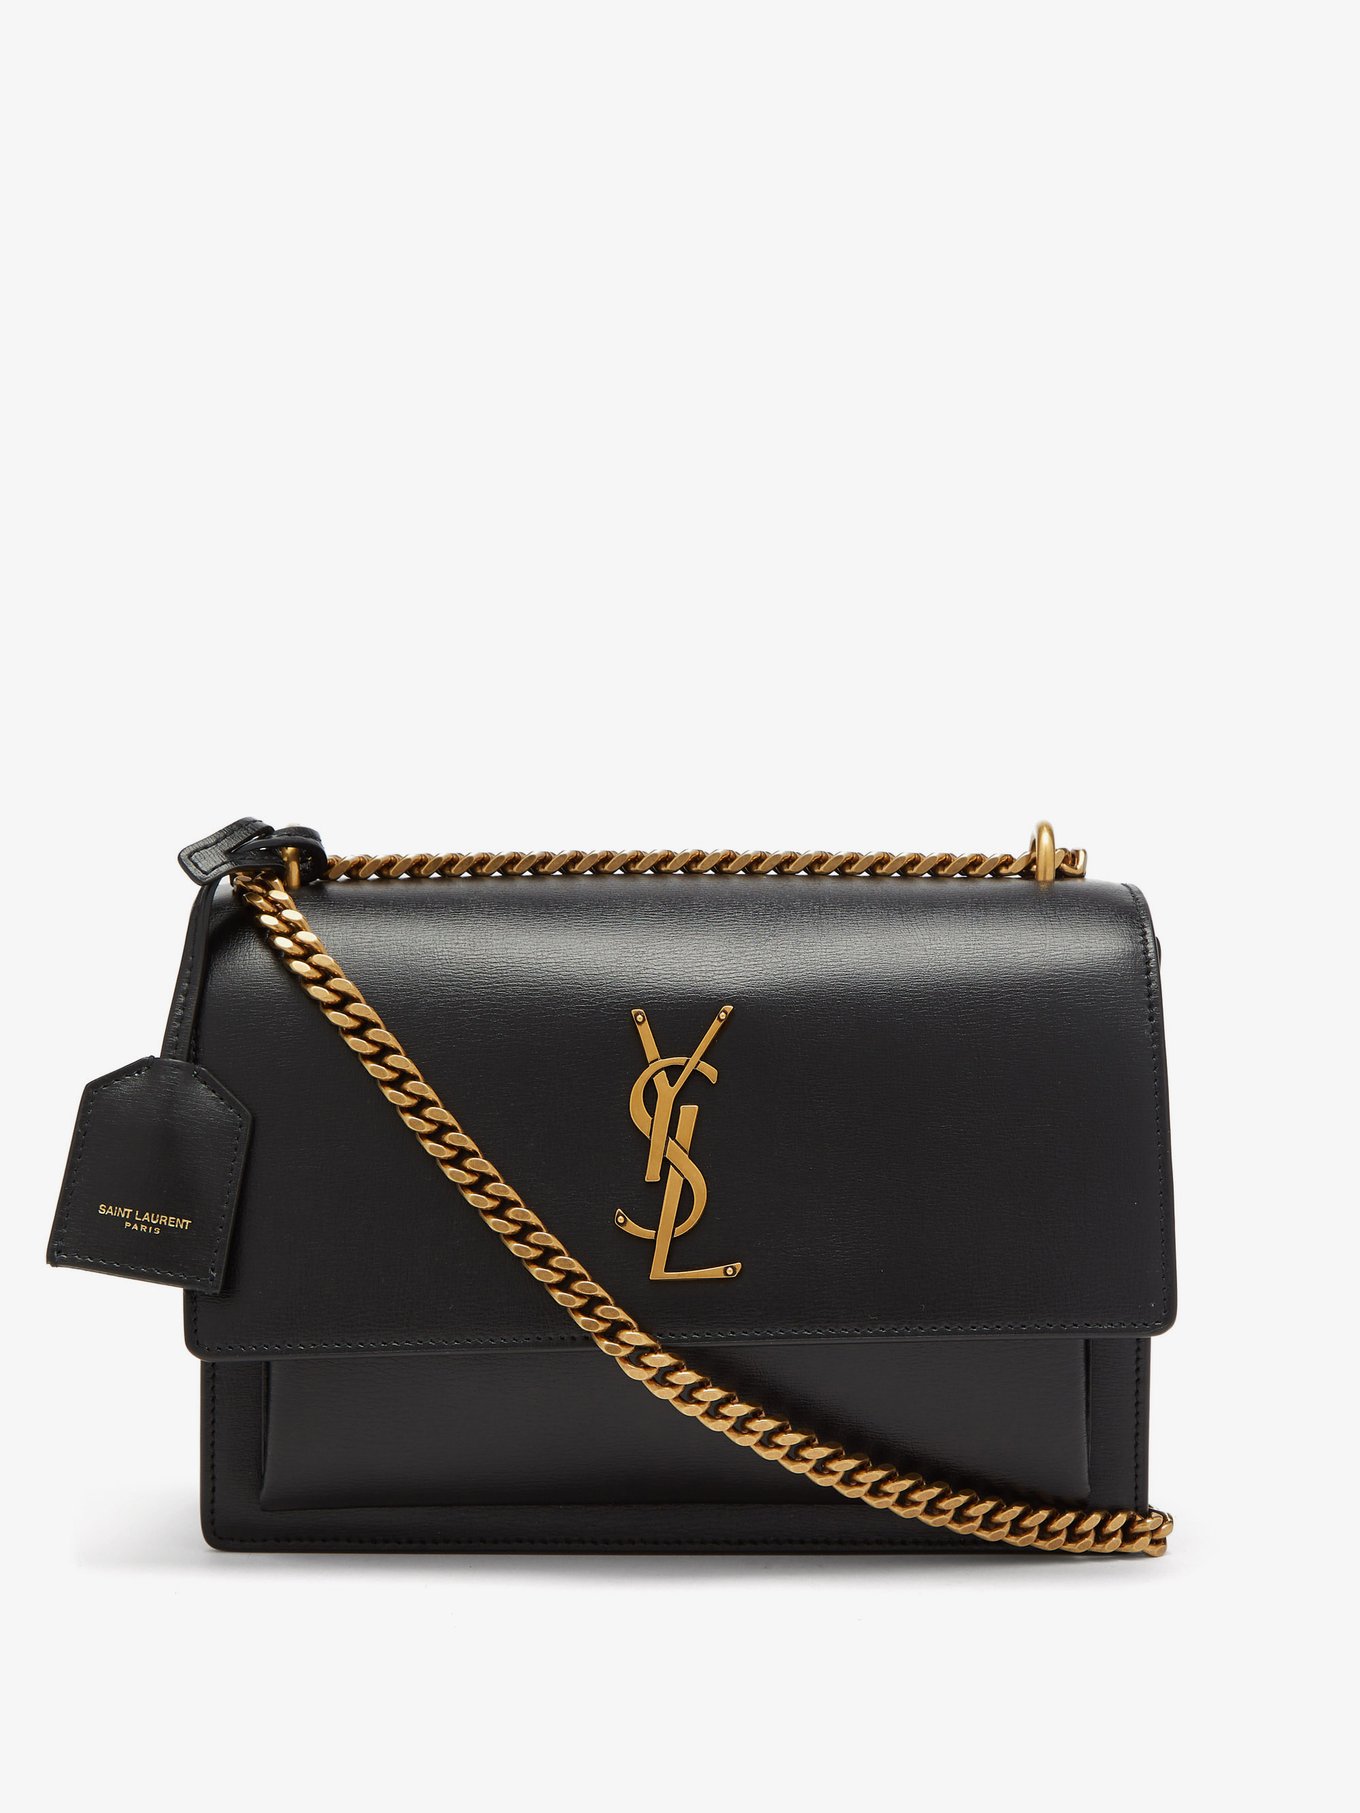 Bag sunset chain wallet ives saint laurent on the account